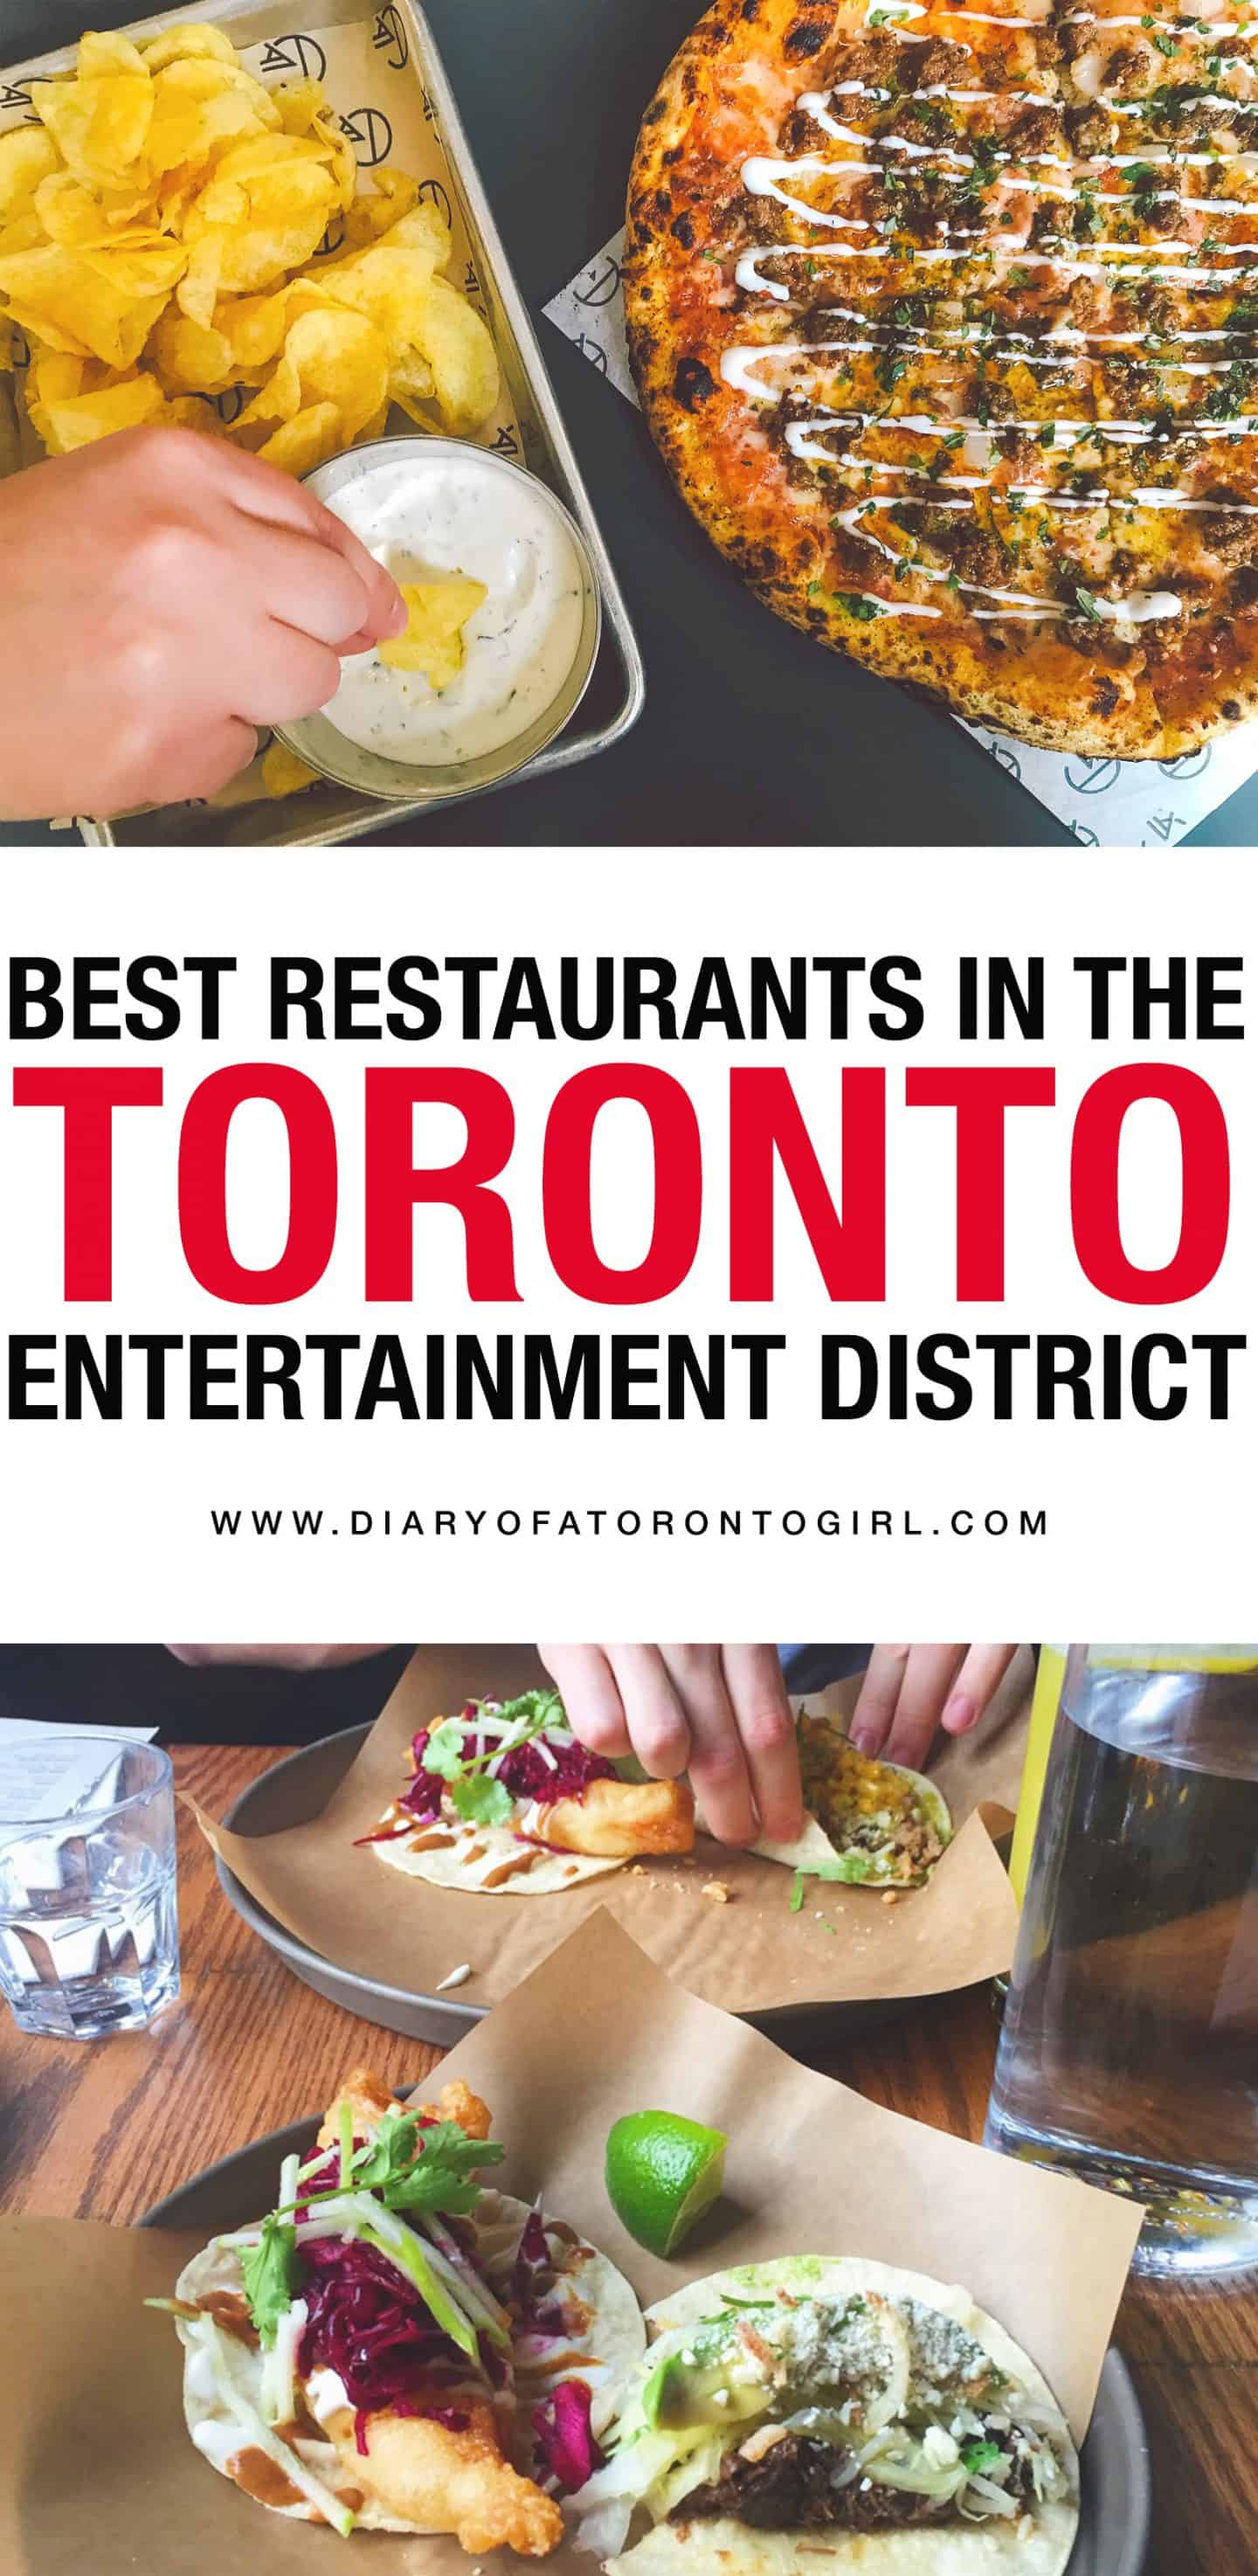 Planning a visit to Toronto, Ontario? Here are 10 of the best restaurants to eat at in Toronto's Entertainment District in the heart of downtown!